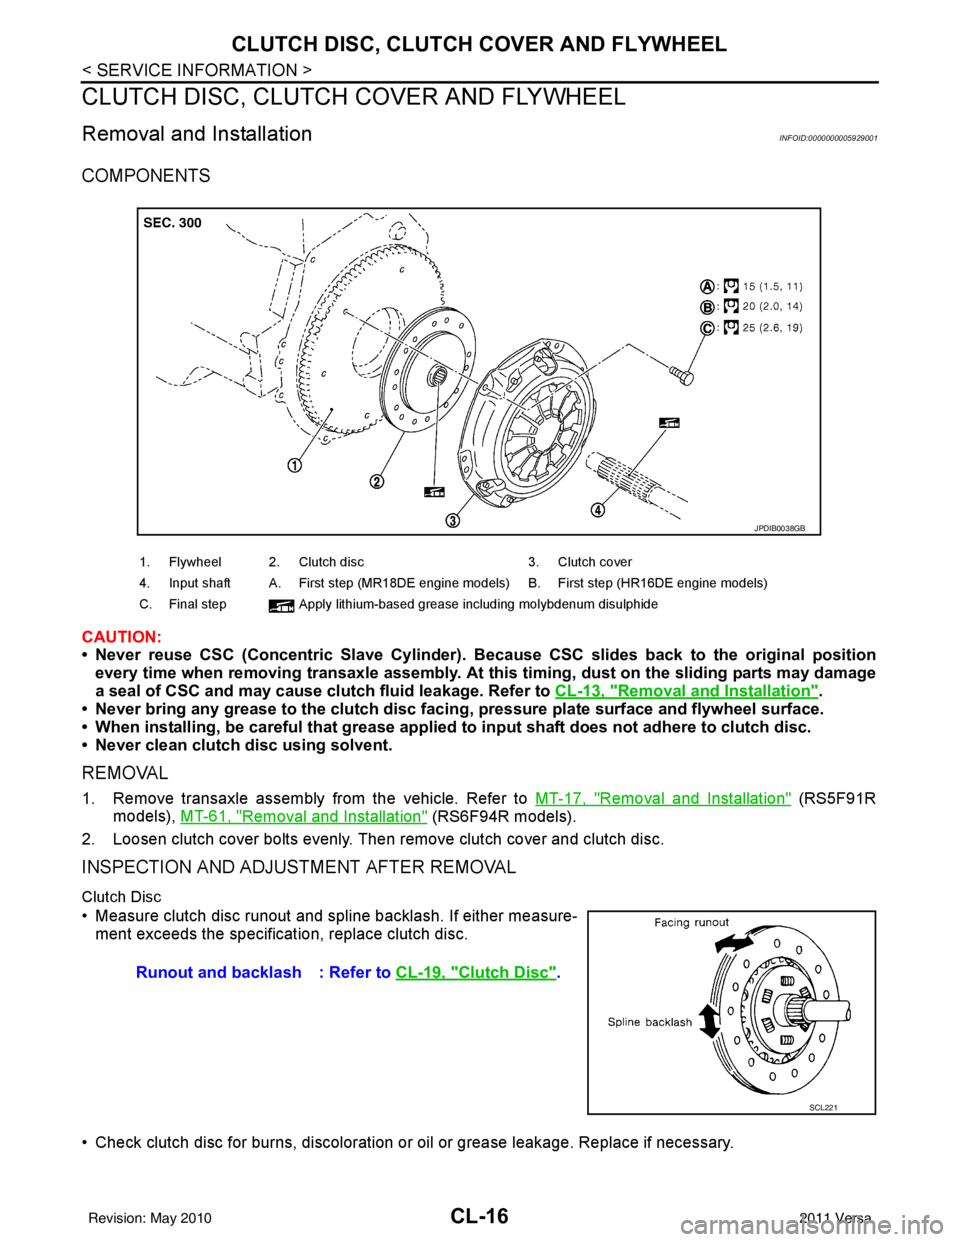 NISSAN LATIO 2011  Service Repair Manual CL-16
< SERVICE INFORMATION >
CLUTCH DISC, CLUTCH COVER AND FLYWHEEL
CLUTCH DISC, CLUTCH COVER AND FLYWHEEL
Removal and InstallationINFOID:0000000005929001
COMPONENTS
CAUTION:
• Never reuse CSC (Con